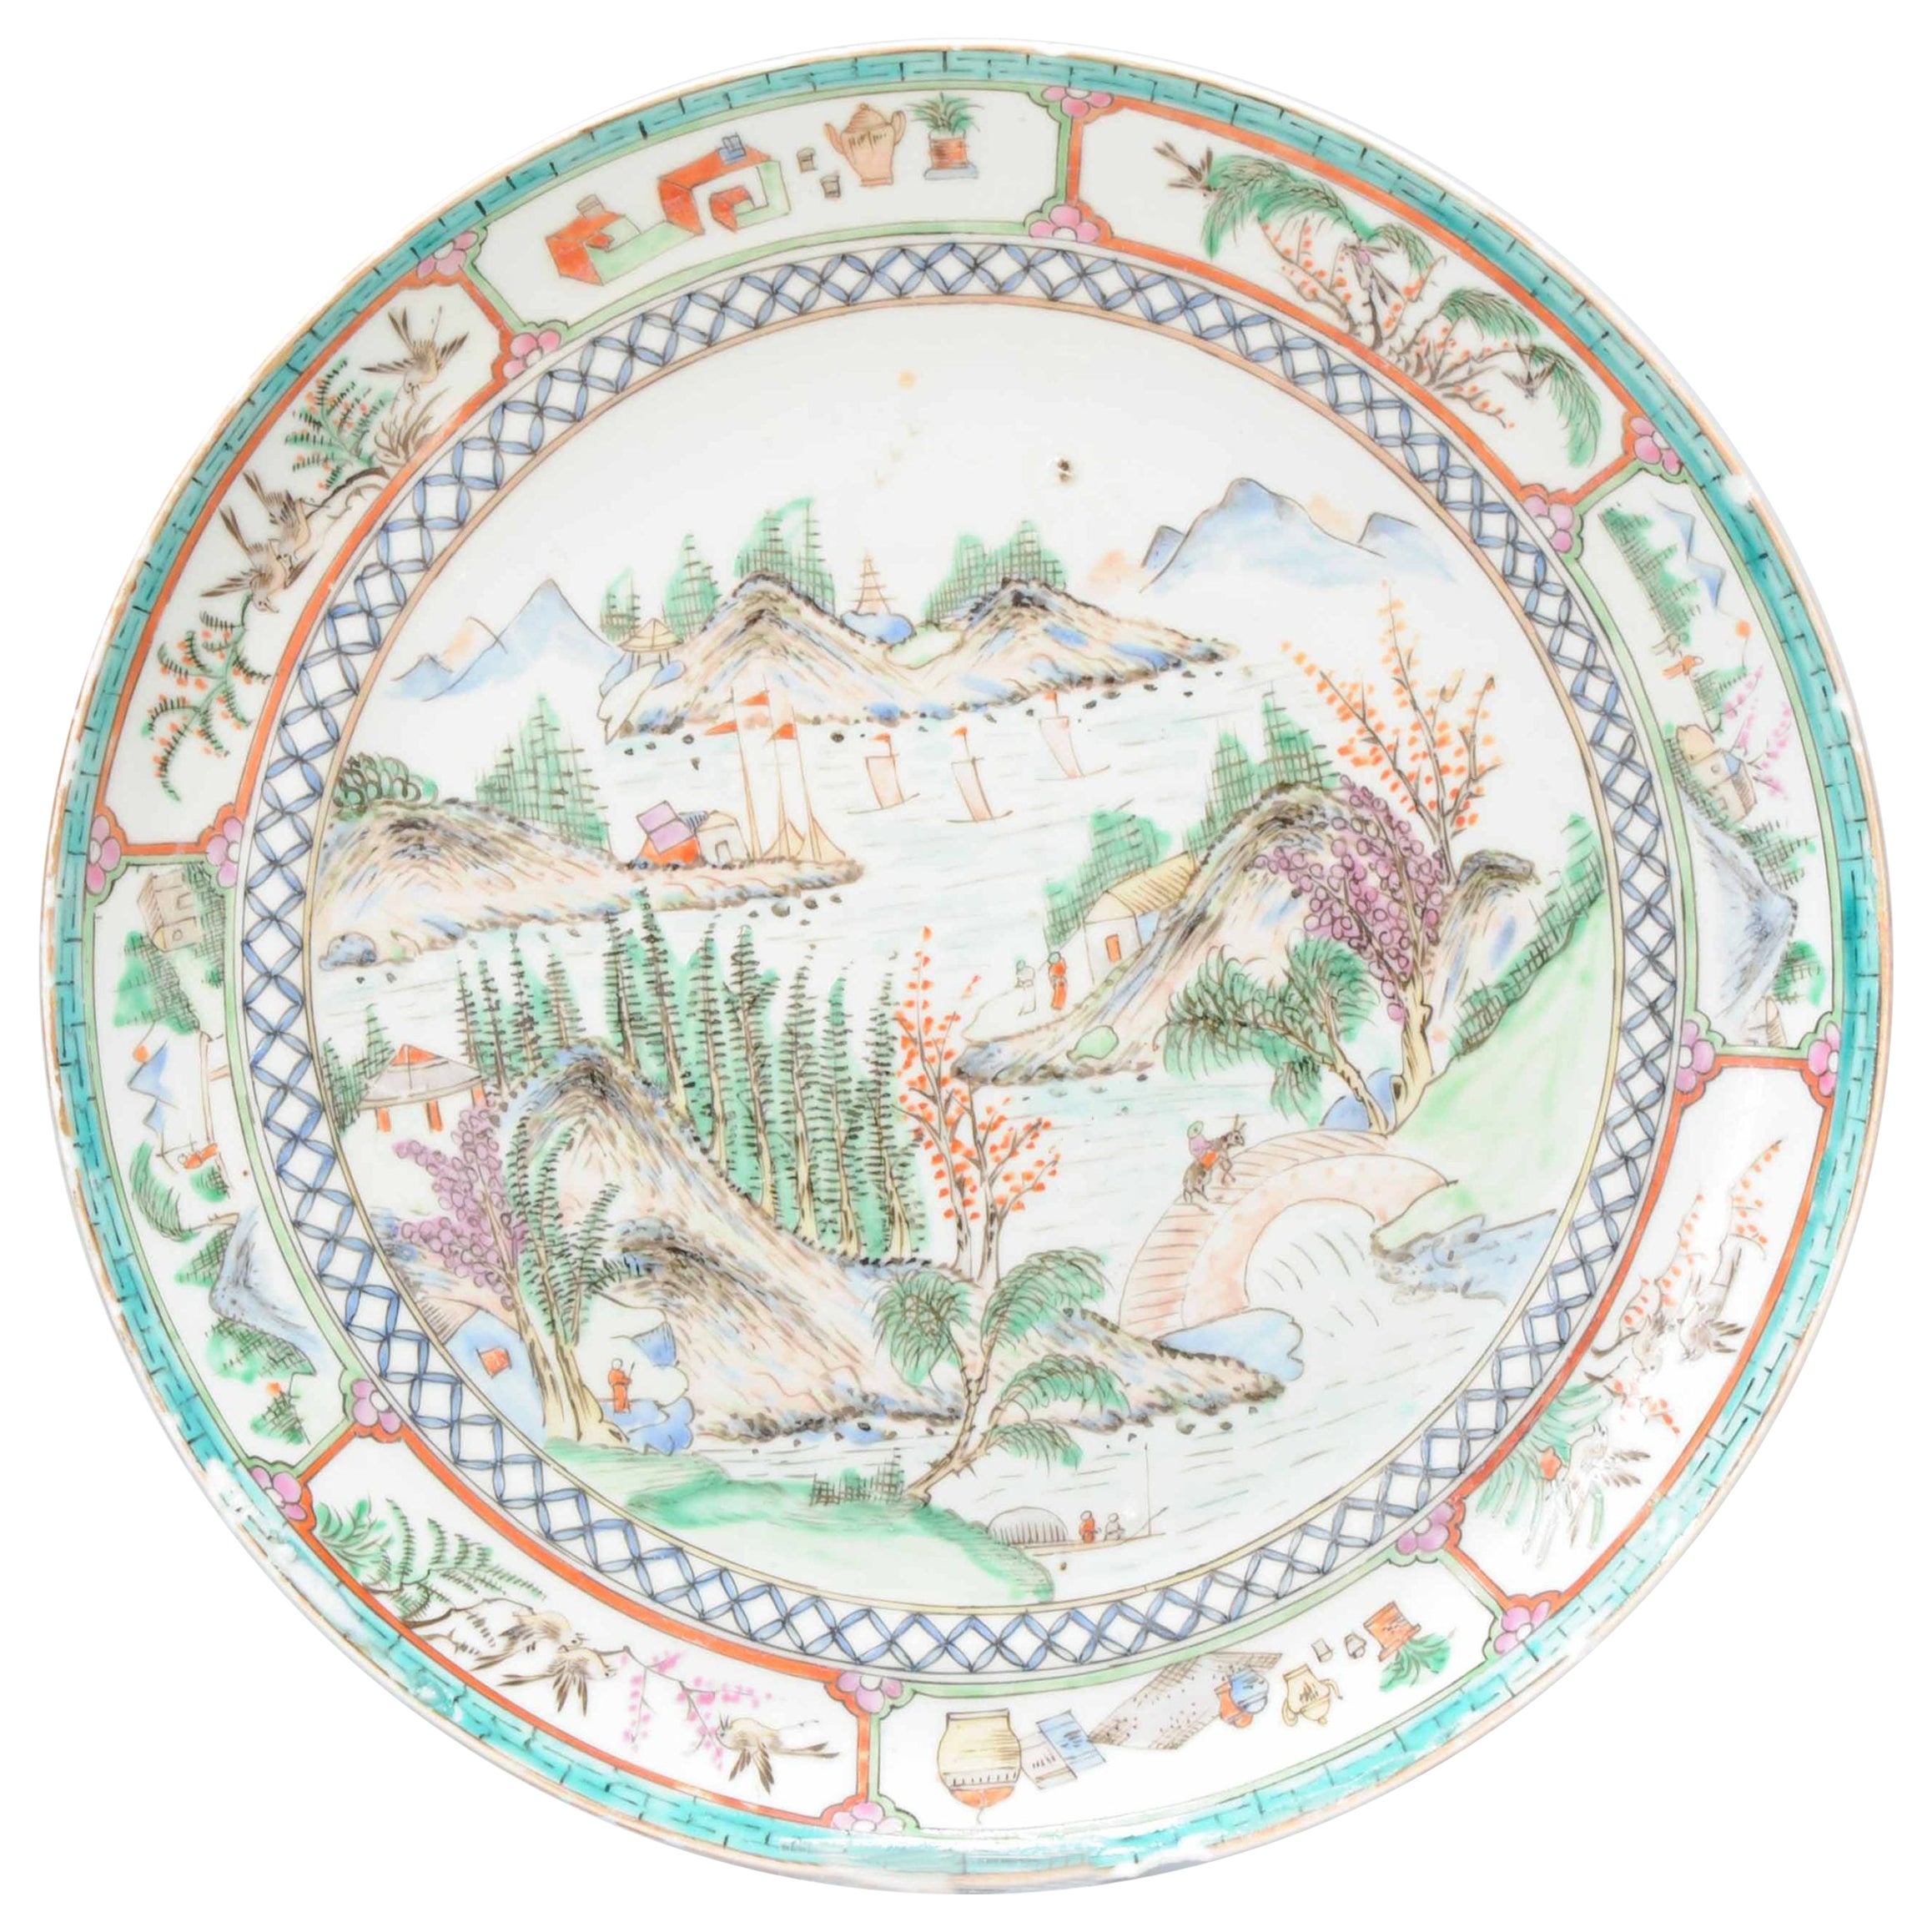 Antique Chinese Porcelain Cantonese Dish Figures and Landscape, 19th Century